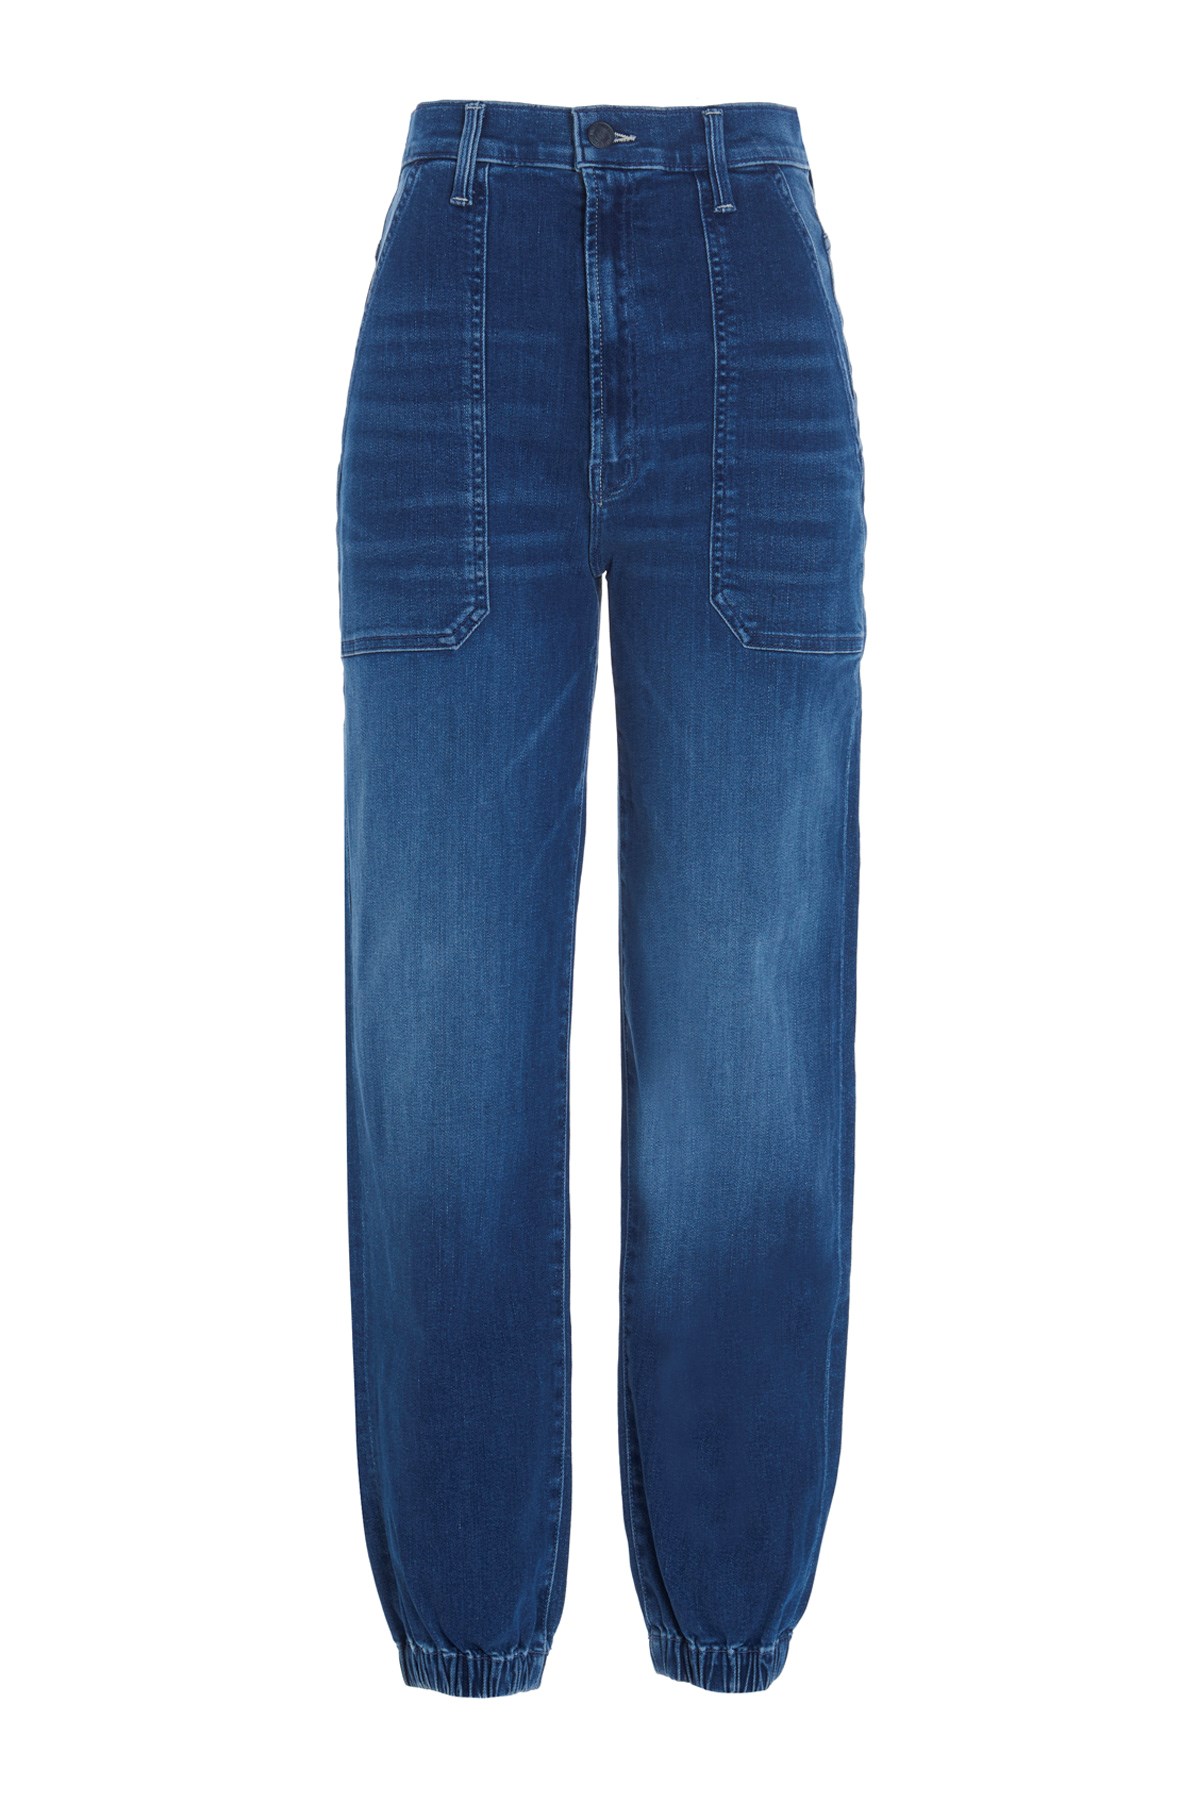 MOTHER 'The Wrapper Patch Springy Ankle' Jeans